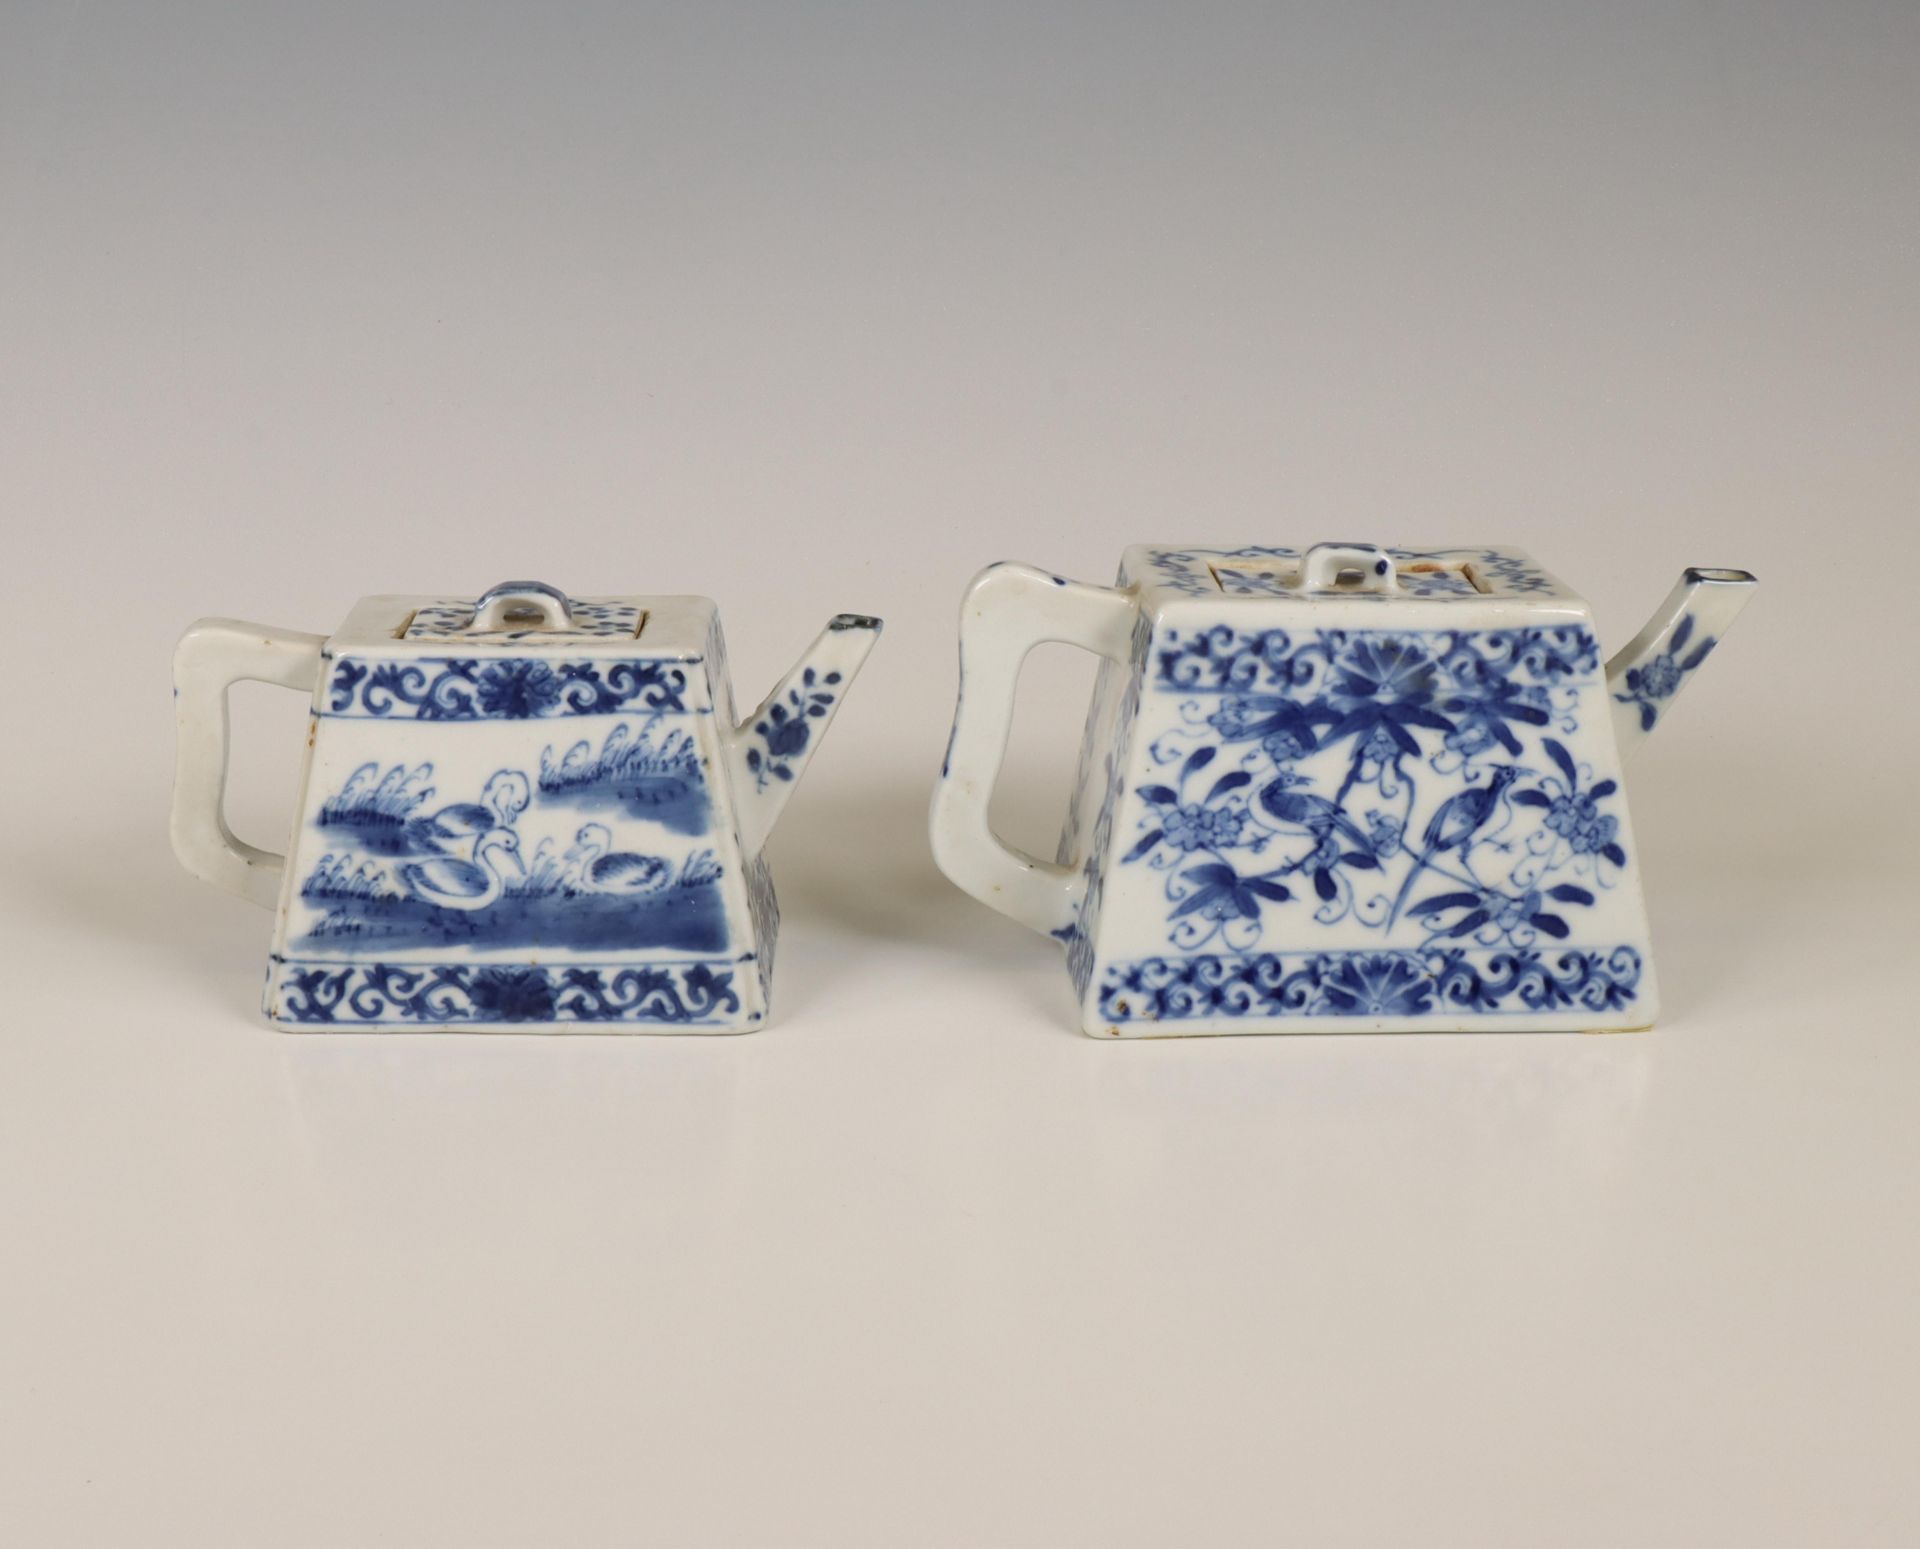 China, two blue and white porcelain rectangular teapots and covers, 18th century, - Image 2 of 5